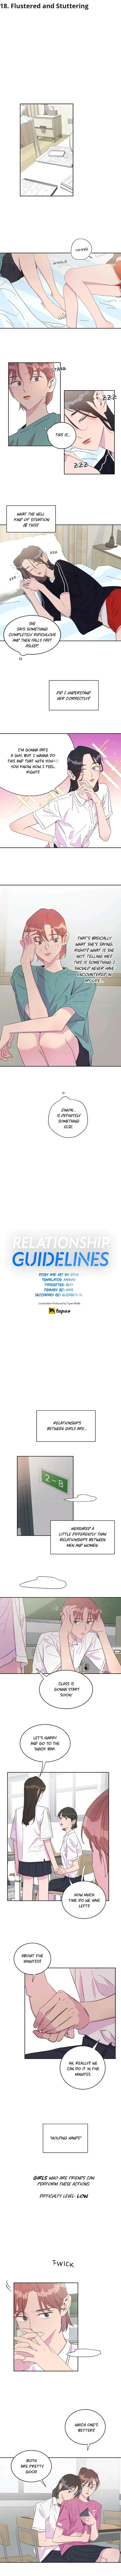 Relationship Guidelines - Page 1